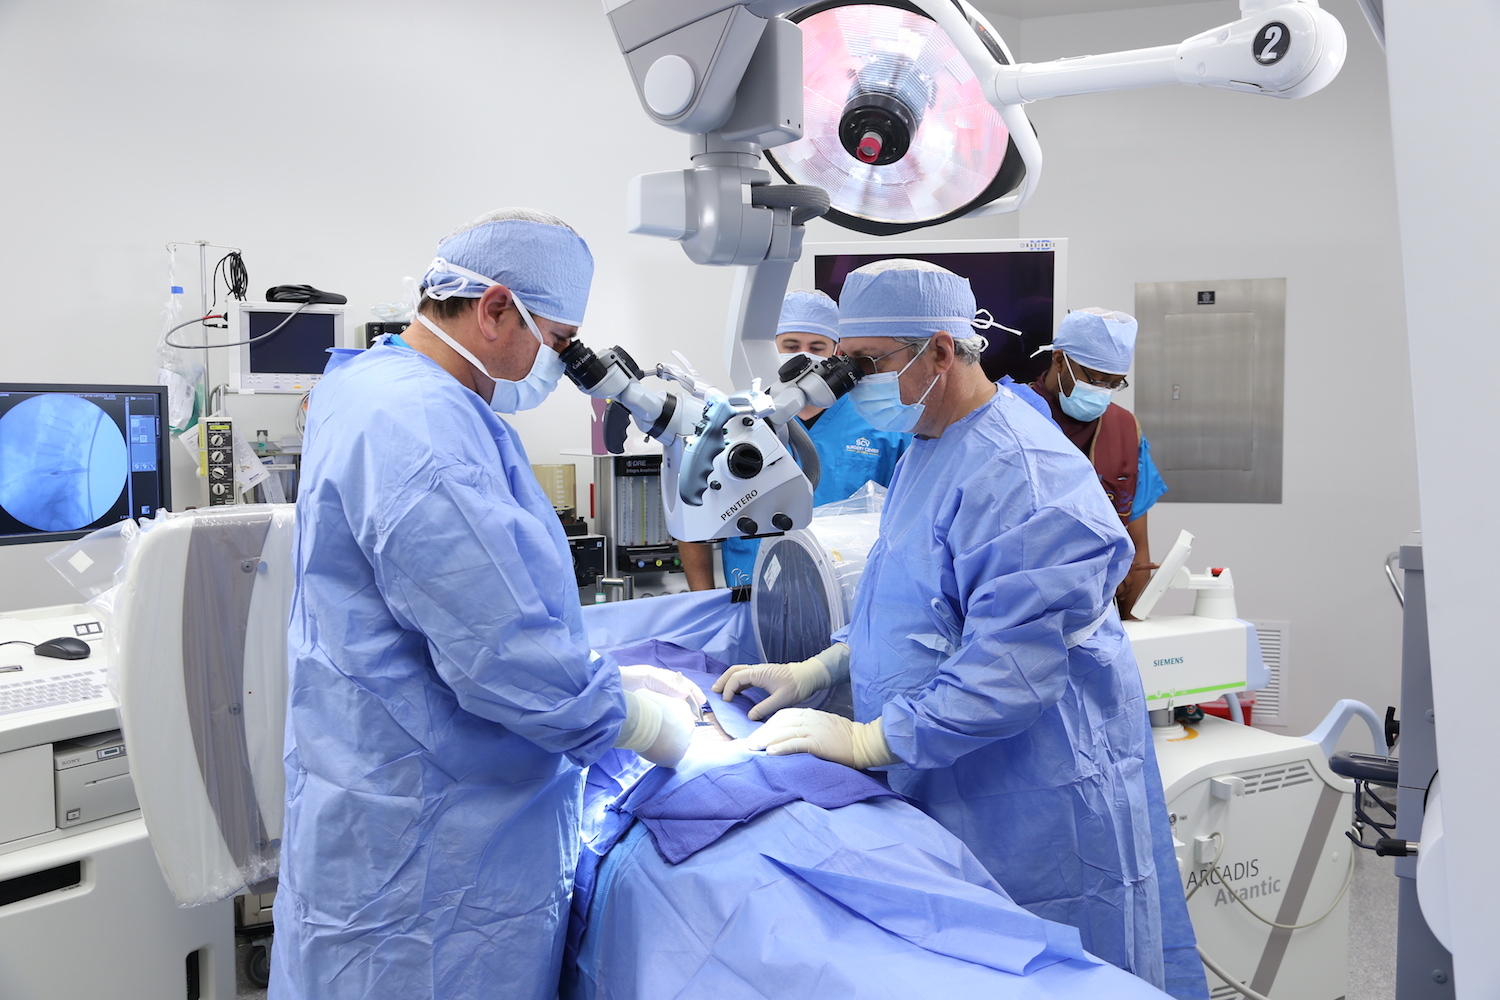 Surgery Center of Viera, Melbourne FL - Surgical Microscope